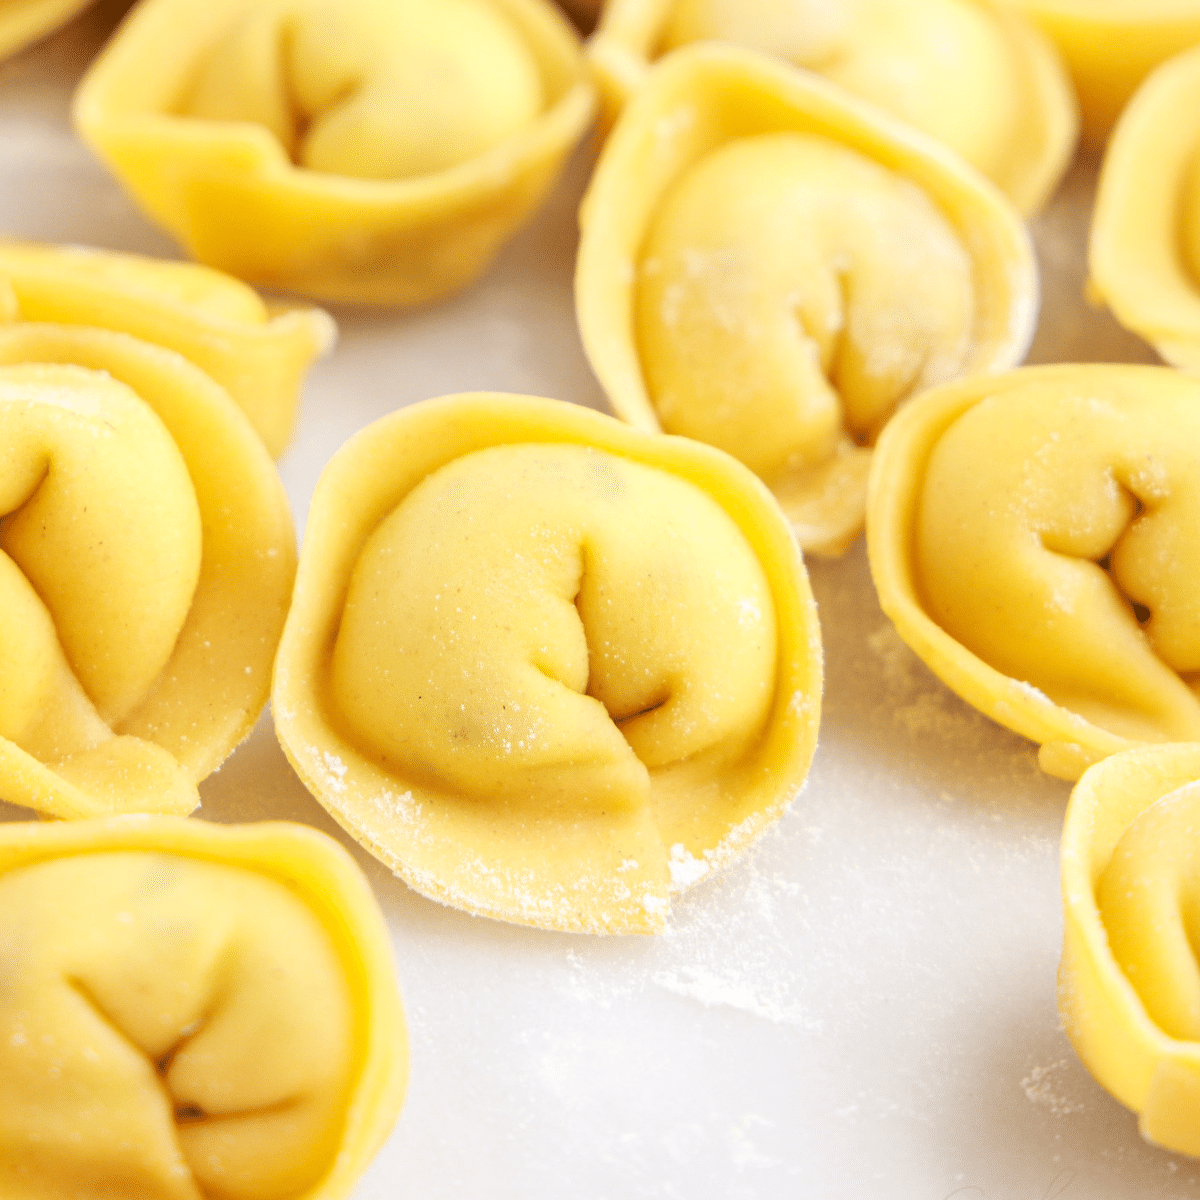 How To Make Tortellini the Easy Way